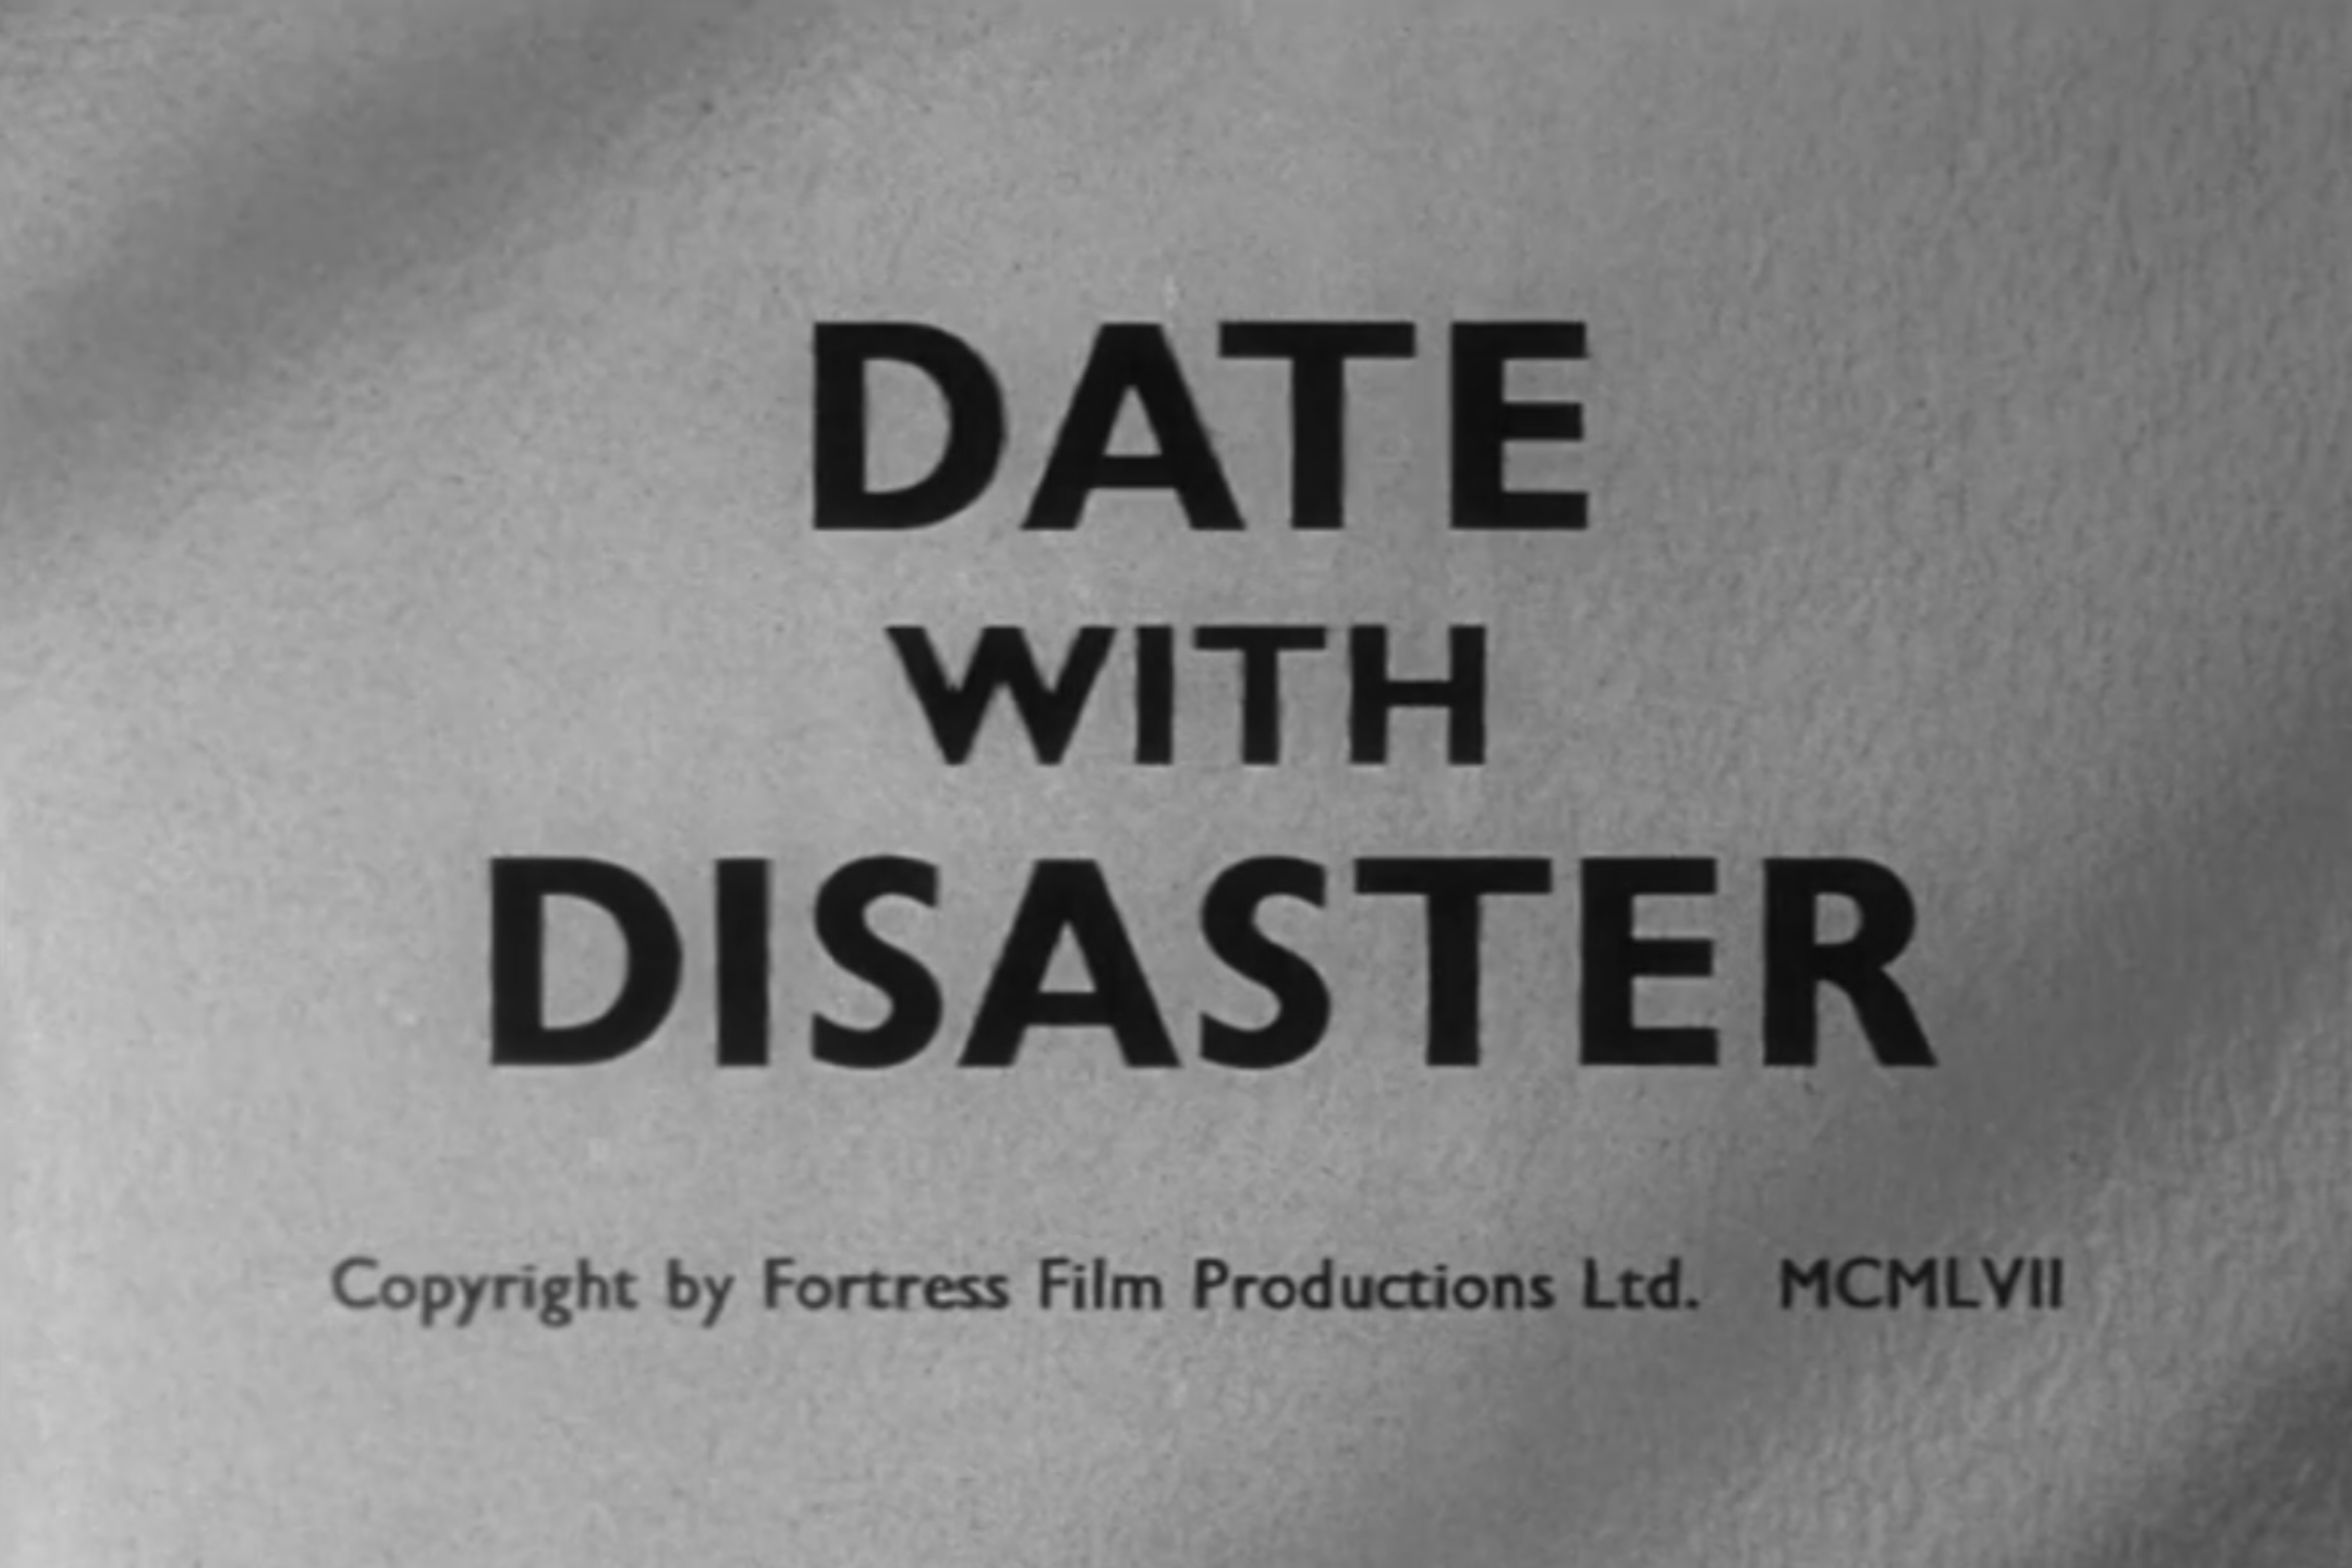 Date with Disaster (1957) Screenshot 1 